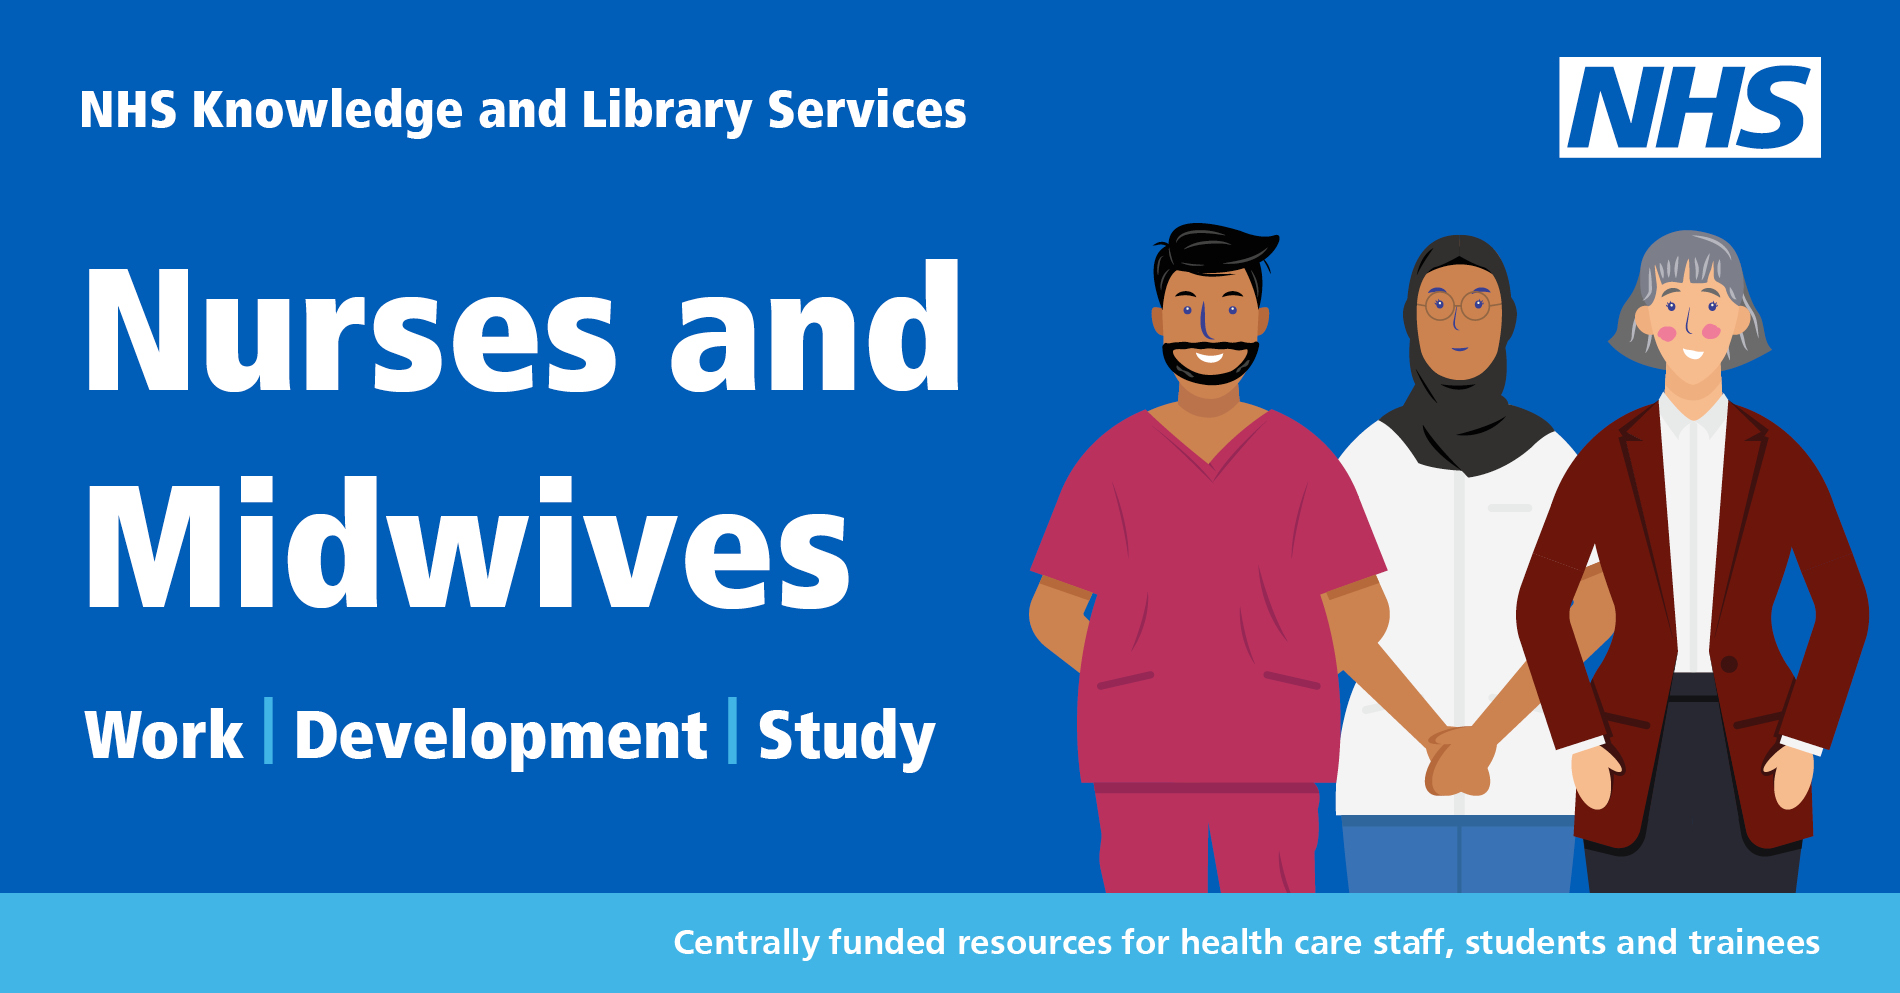 Text next to illustration of nursing staff, NHS Knowledge and Library Services: Nurses and Midwives: Work/ Development/ Study. 